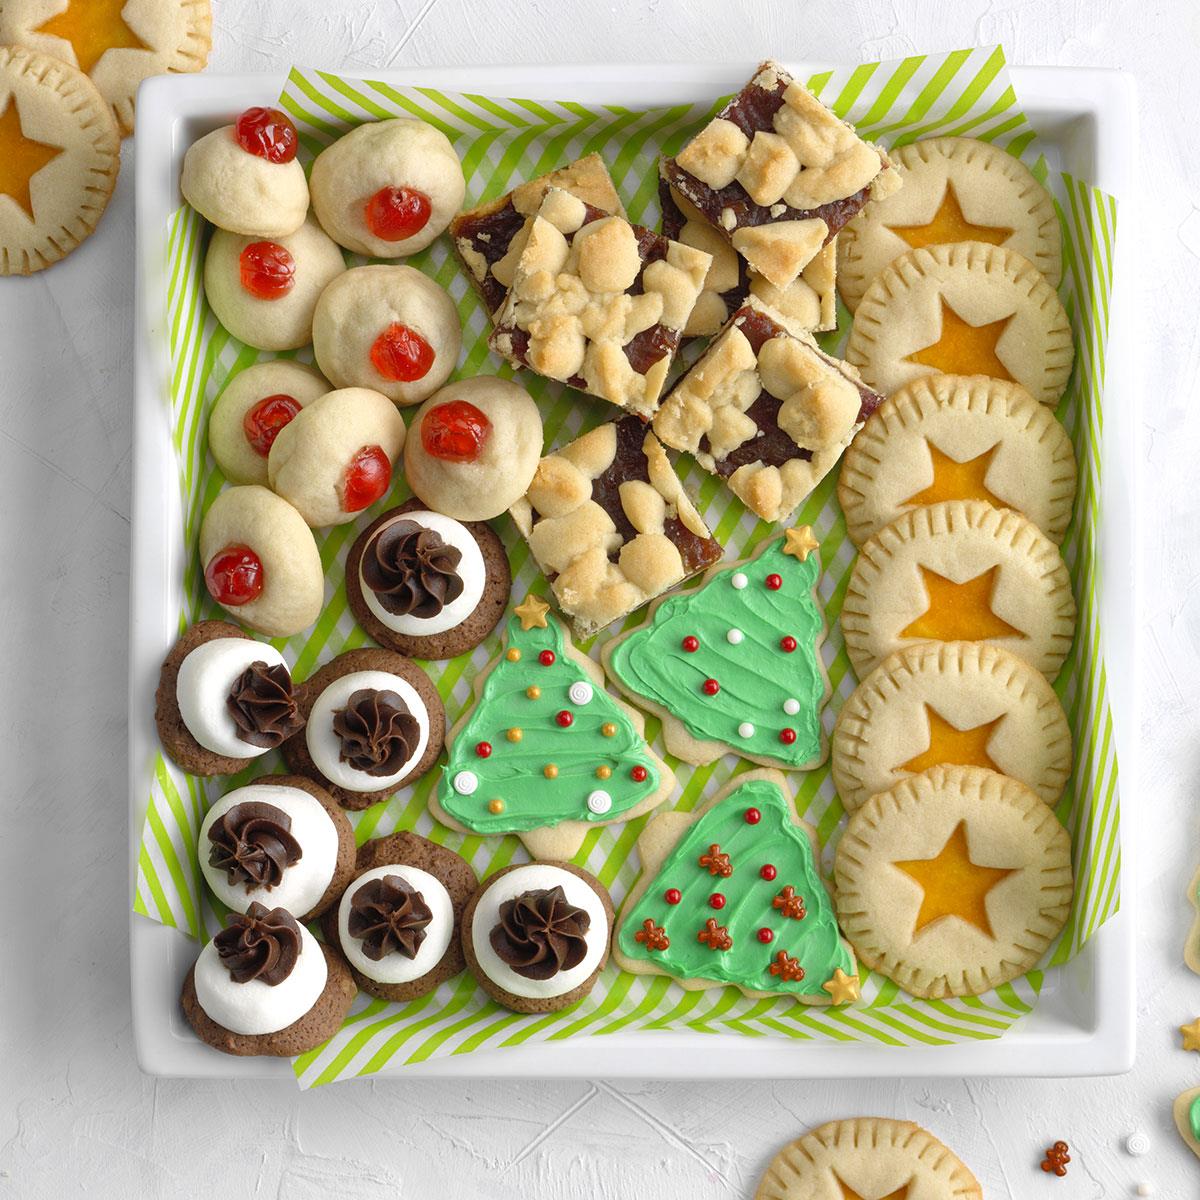 How to Build the Perfect Cookie Tray 